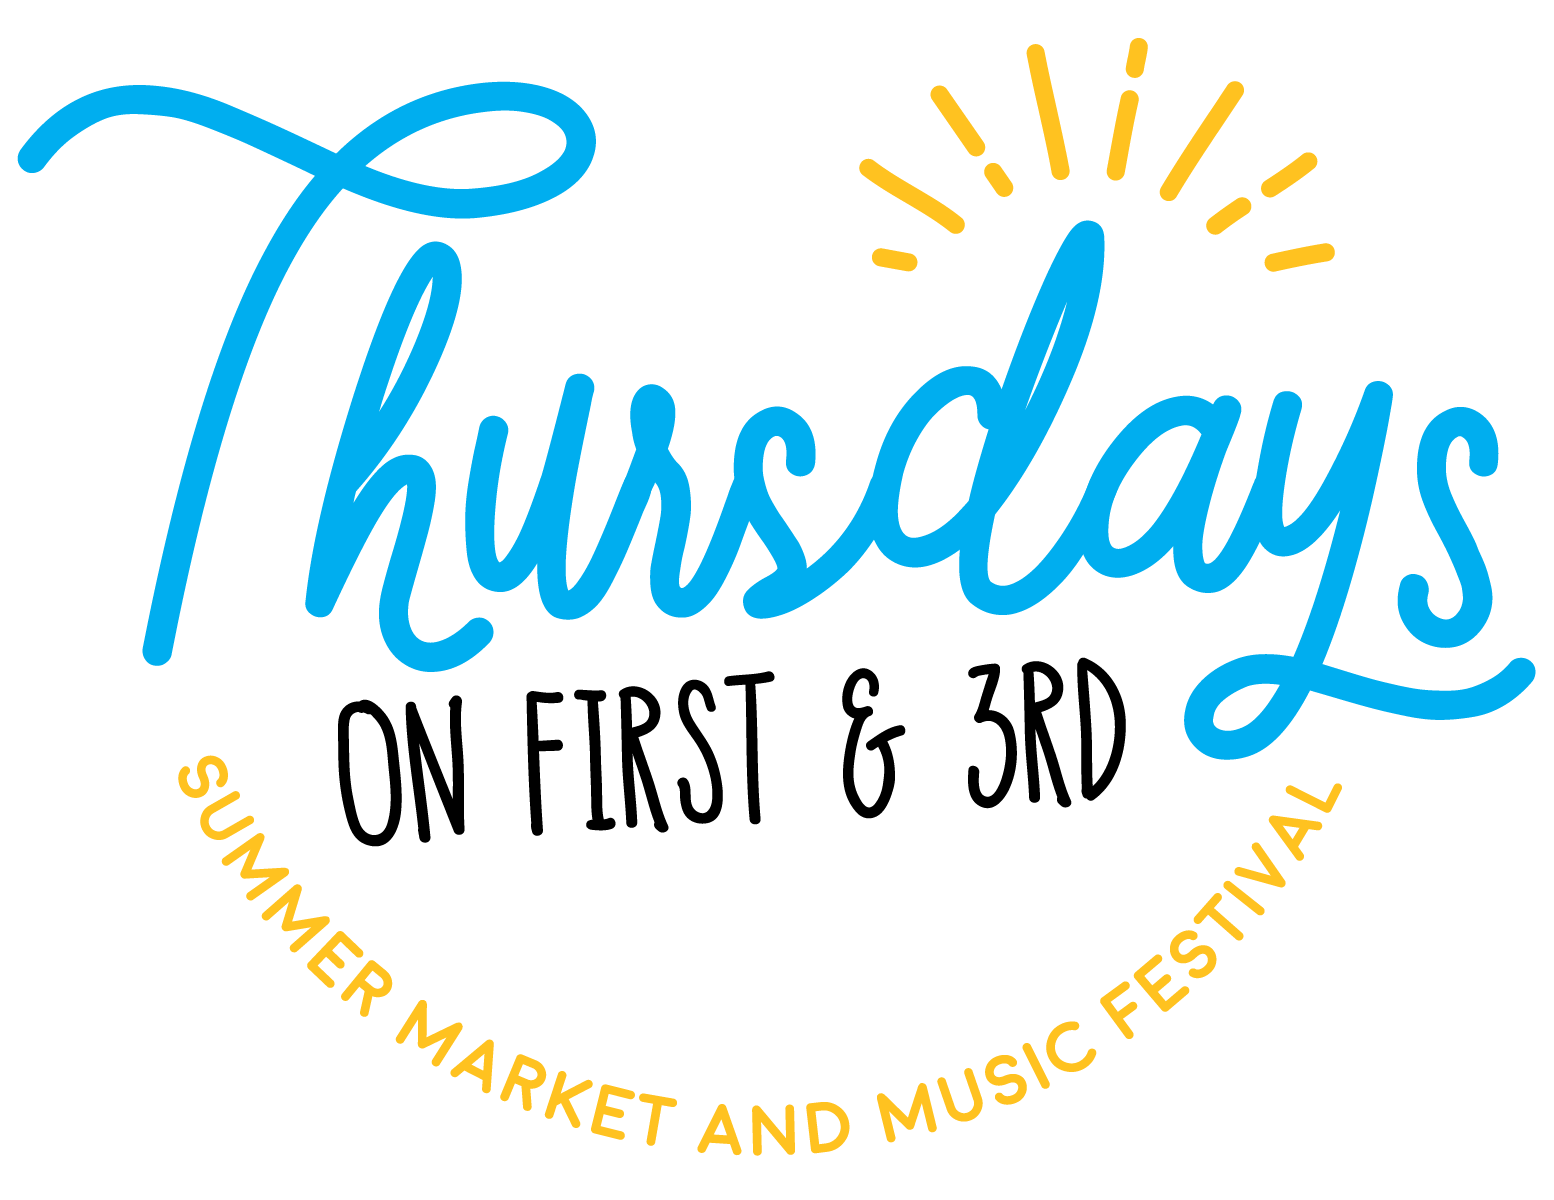 2017 Thursday on First and 3rd Summer Market and Music Festival